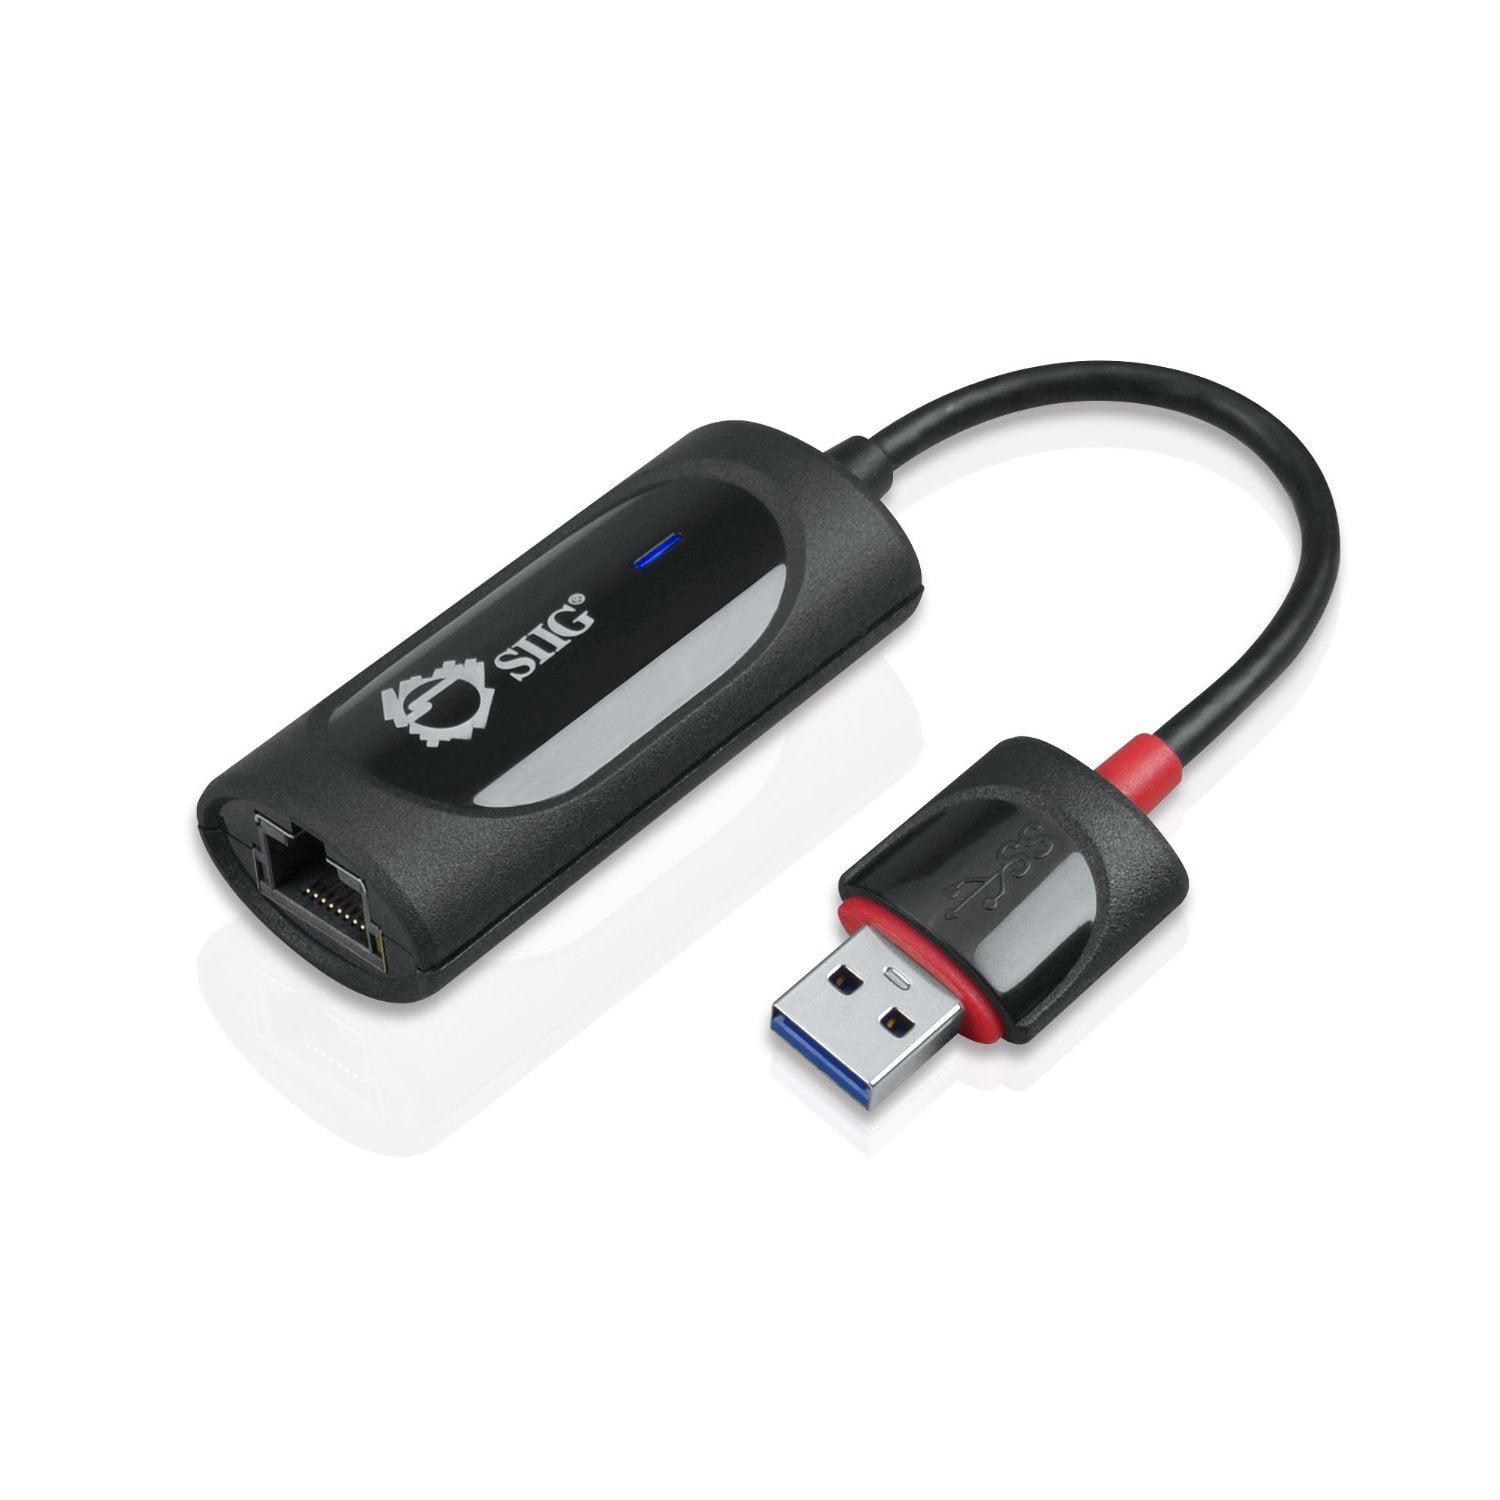 usb 3.0 connect macbook to monitor